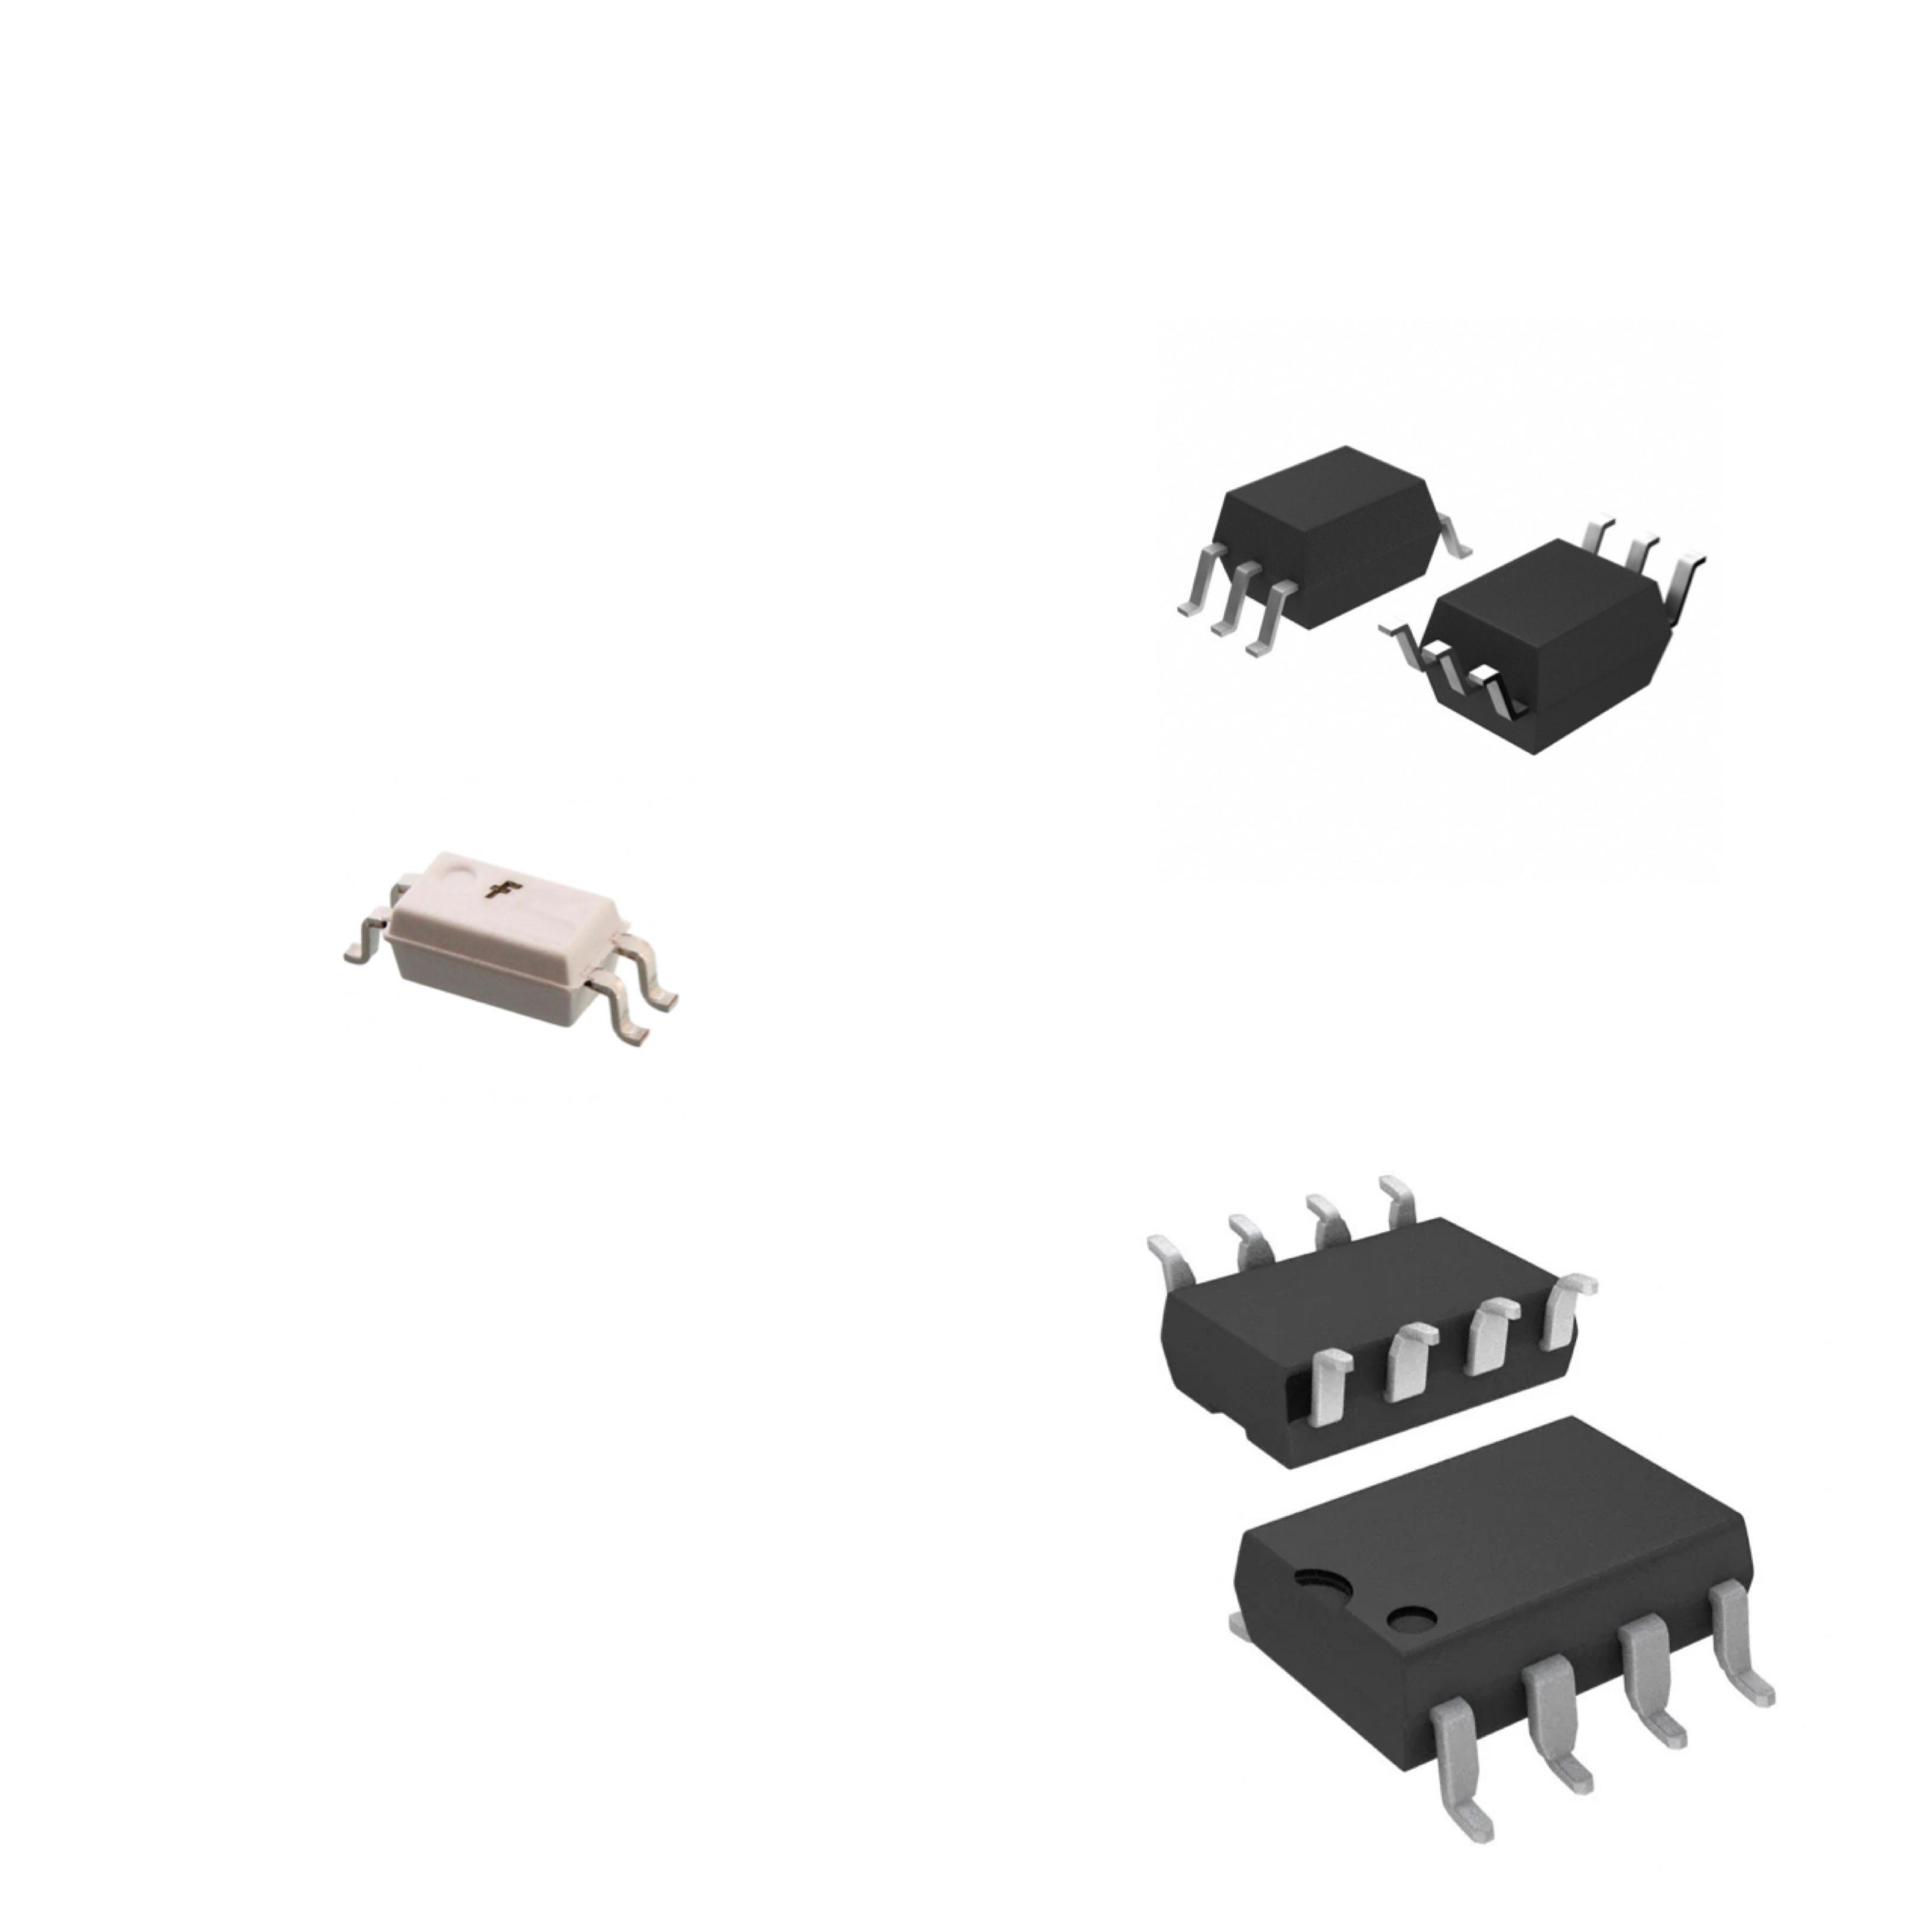 Reasonable price Rk09d1130c3w - 6N137SDM   High SpeedOptocouplers DC 1 5000Vrms SMD-8_6.3mm Optocouplers RoHS – Ronghua